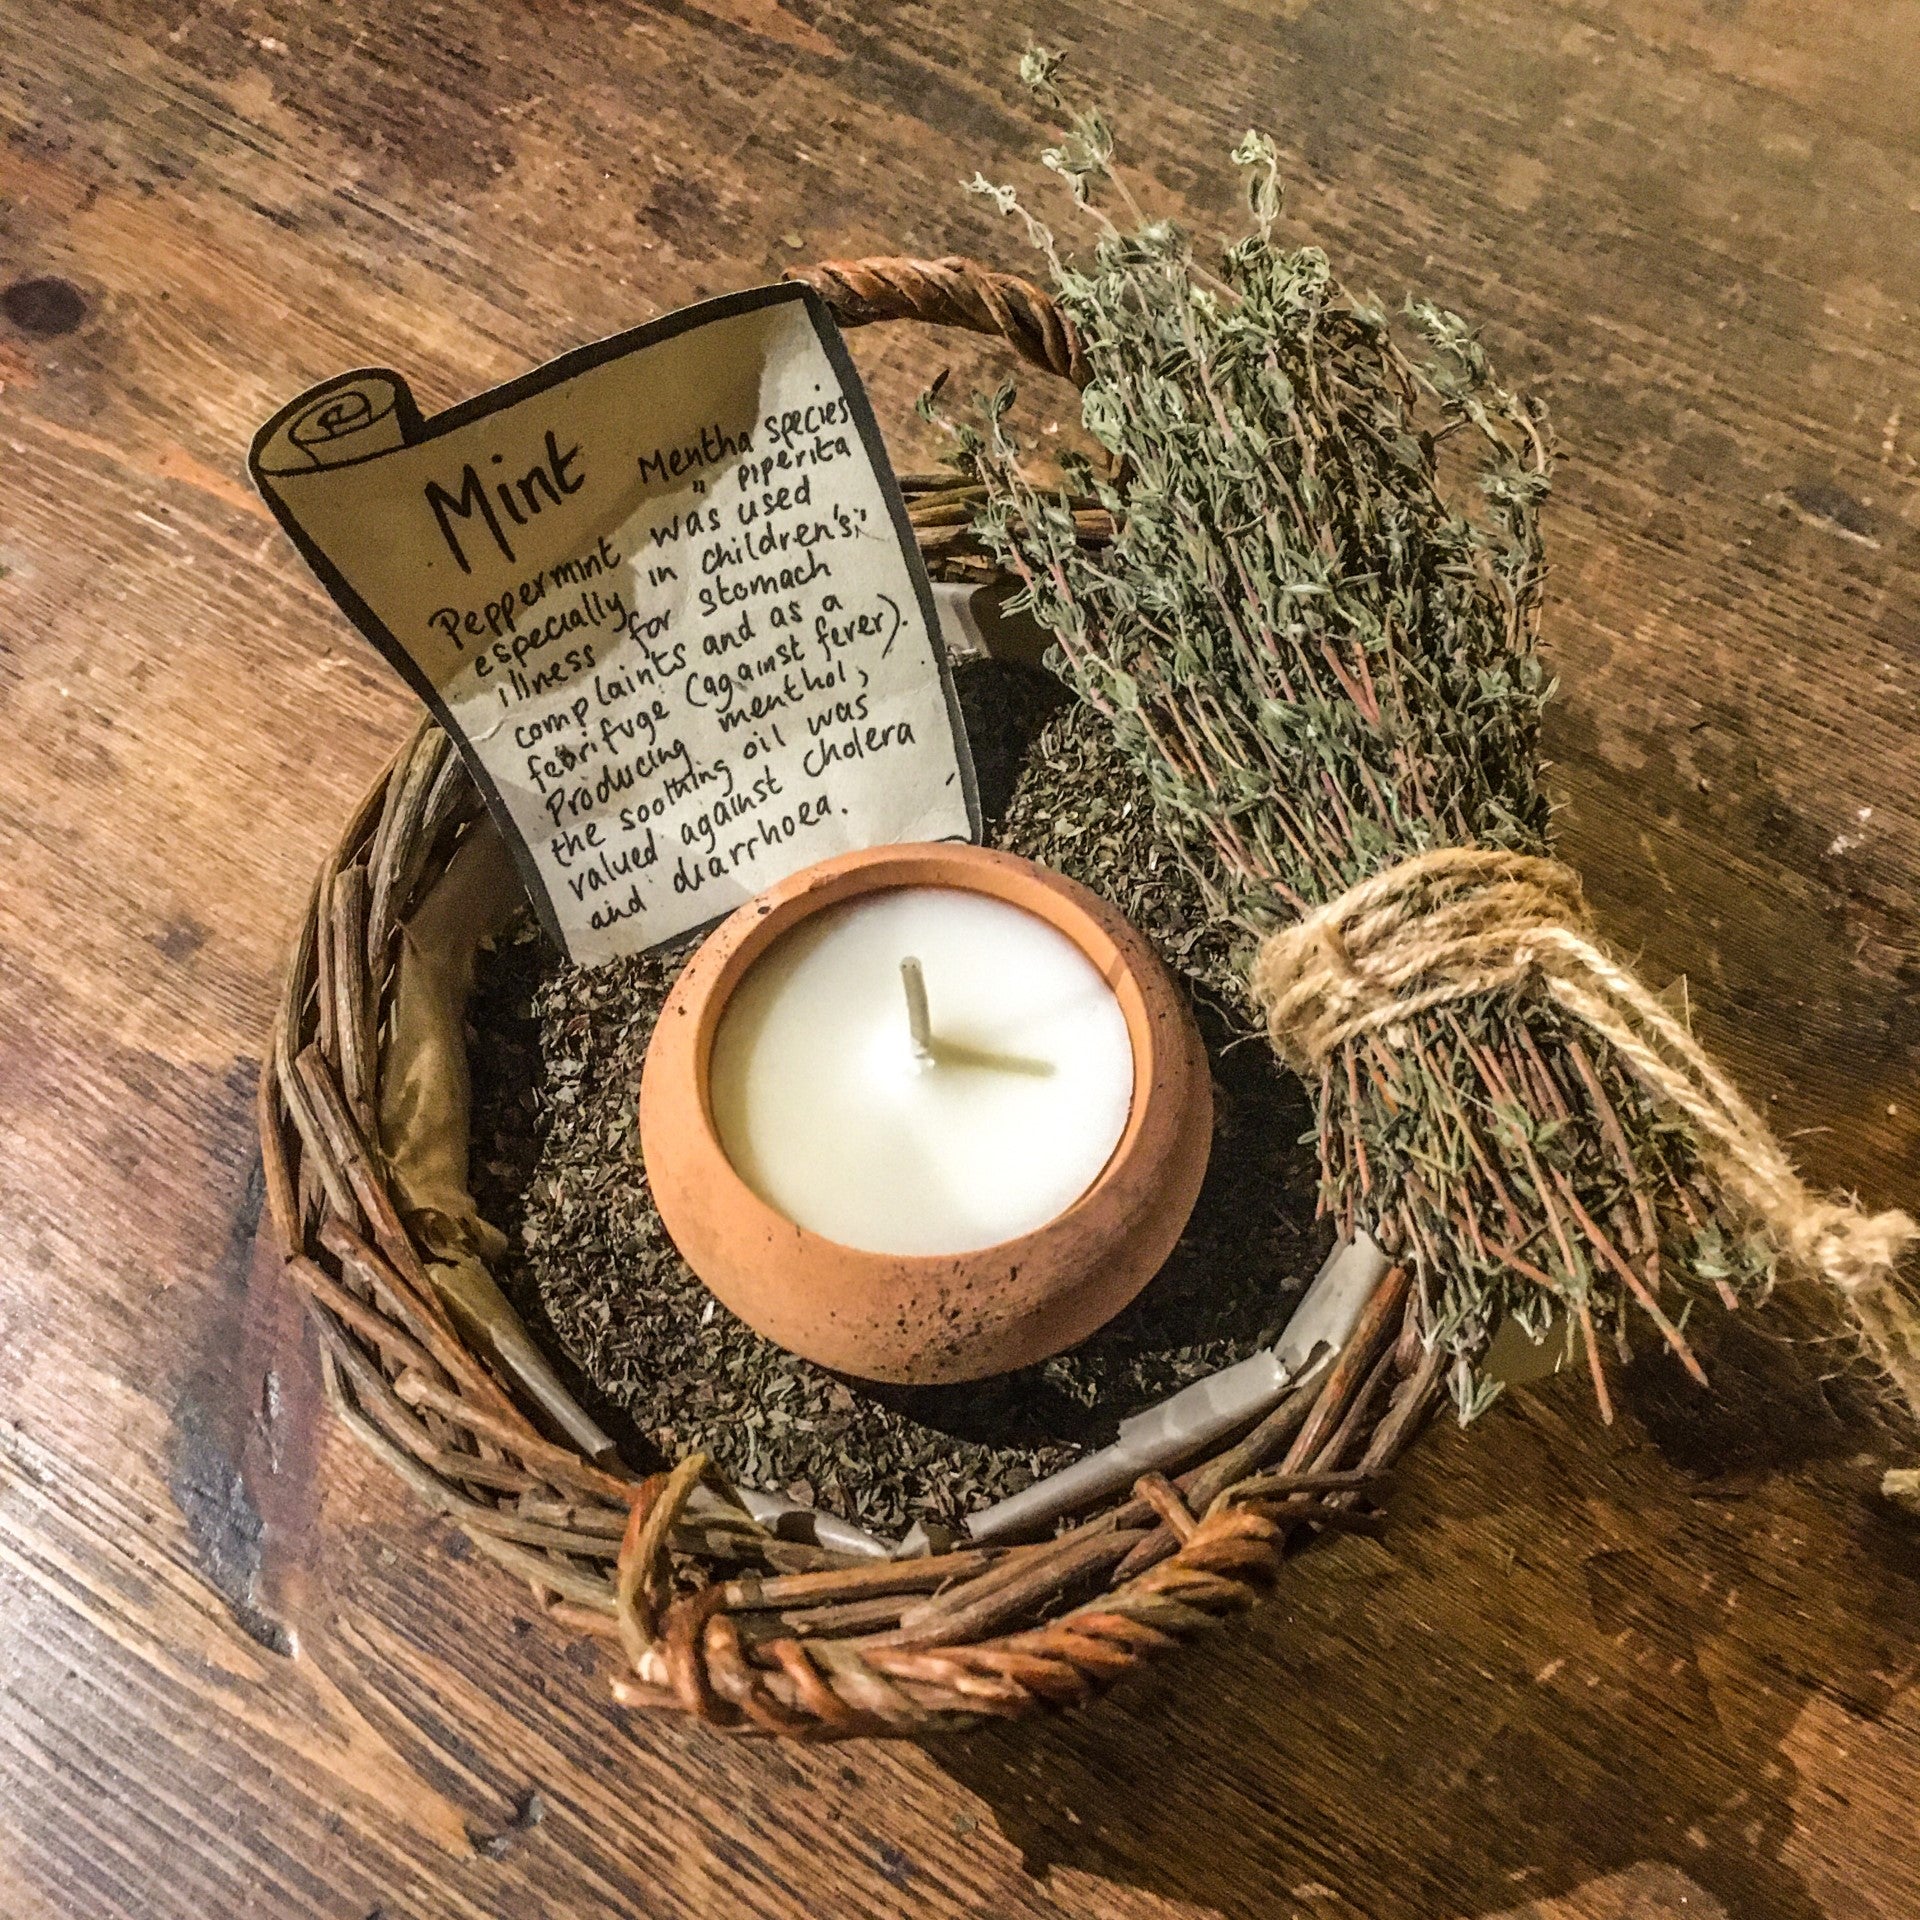 A terracotta tealight placed in a basket of dried mint next to a bundle of thyme sprigs tied with brown string